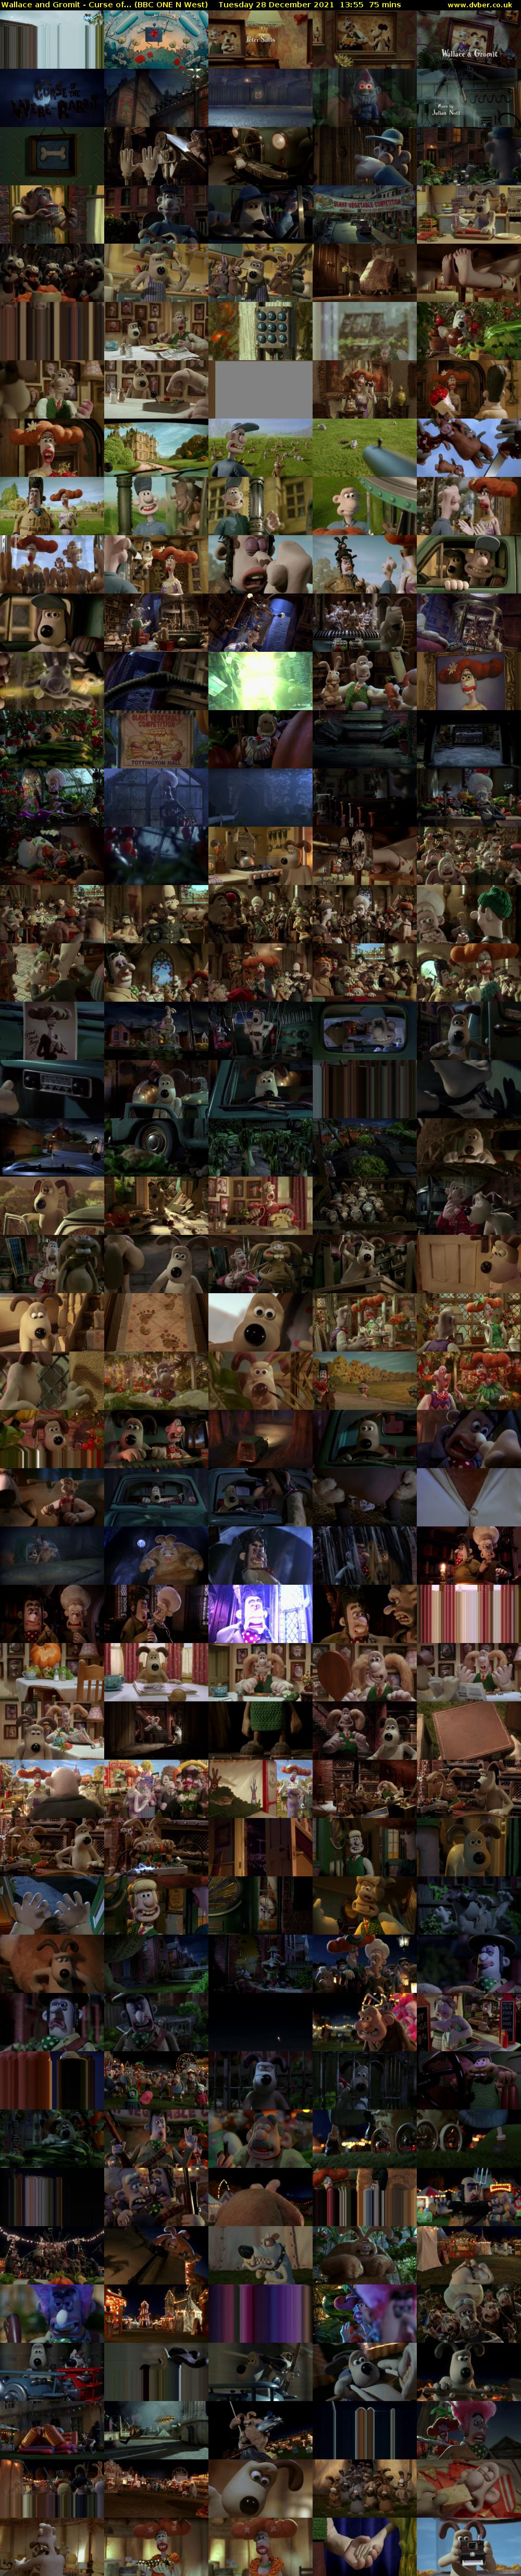 Wallace and Gromit - Curse of... (BBC ONE N West) Tuesday 28 December 2021 13:55 - 15:10